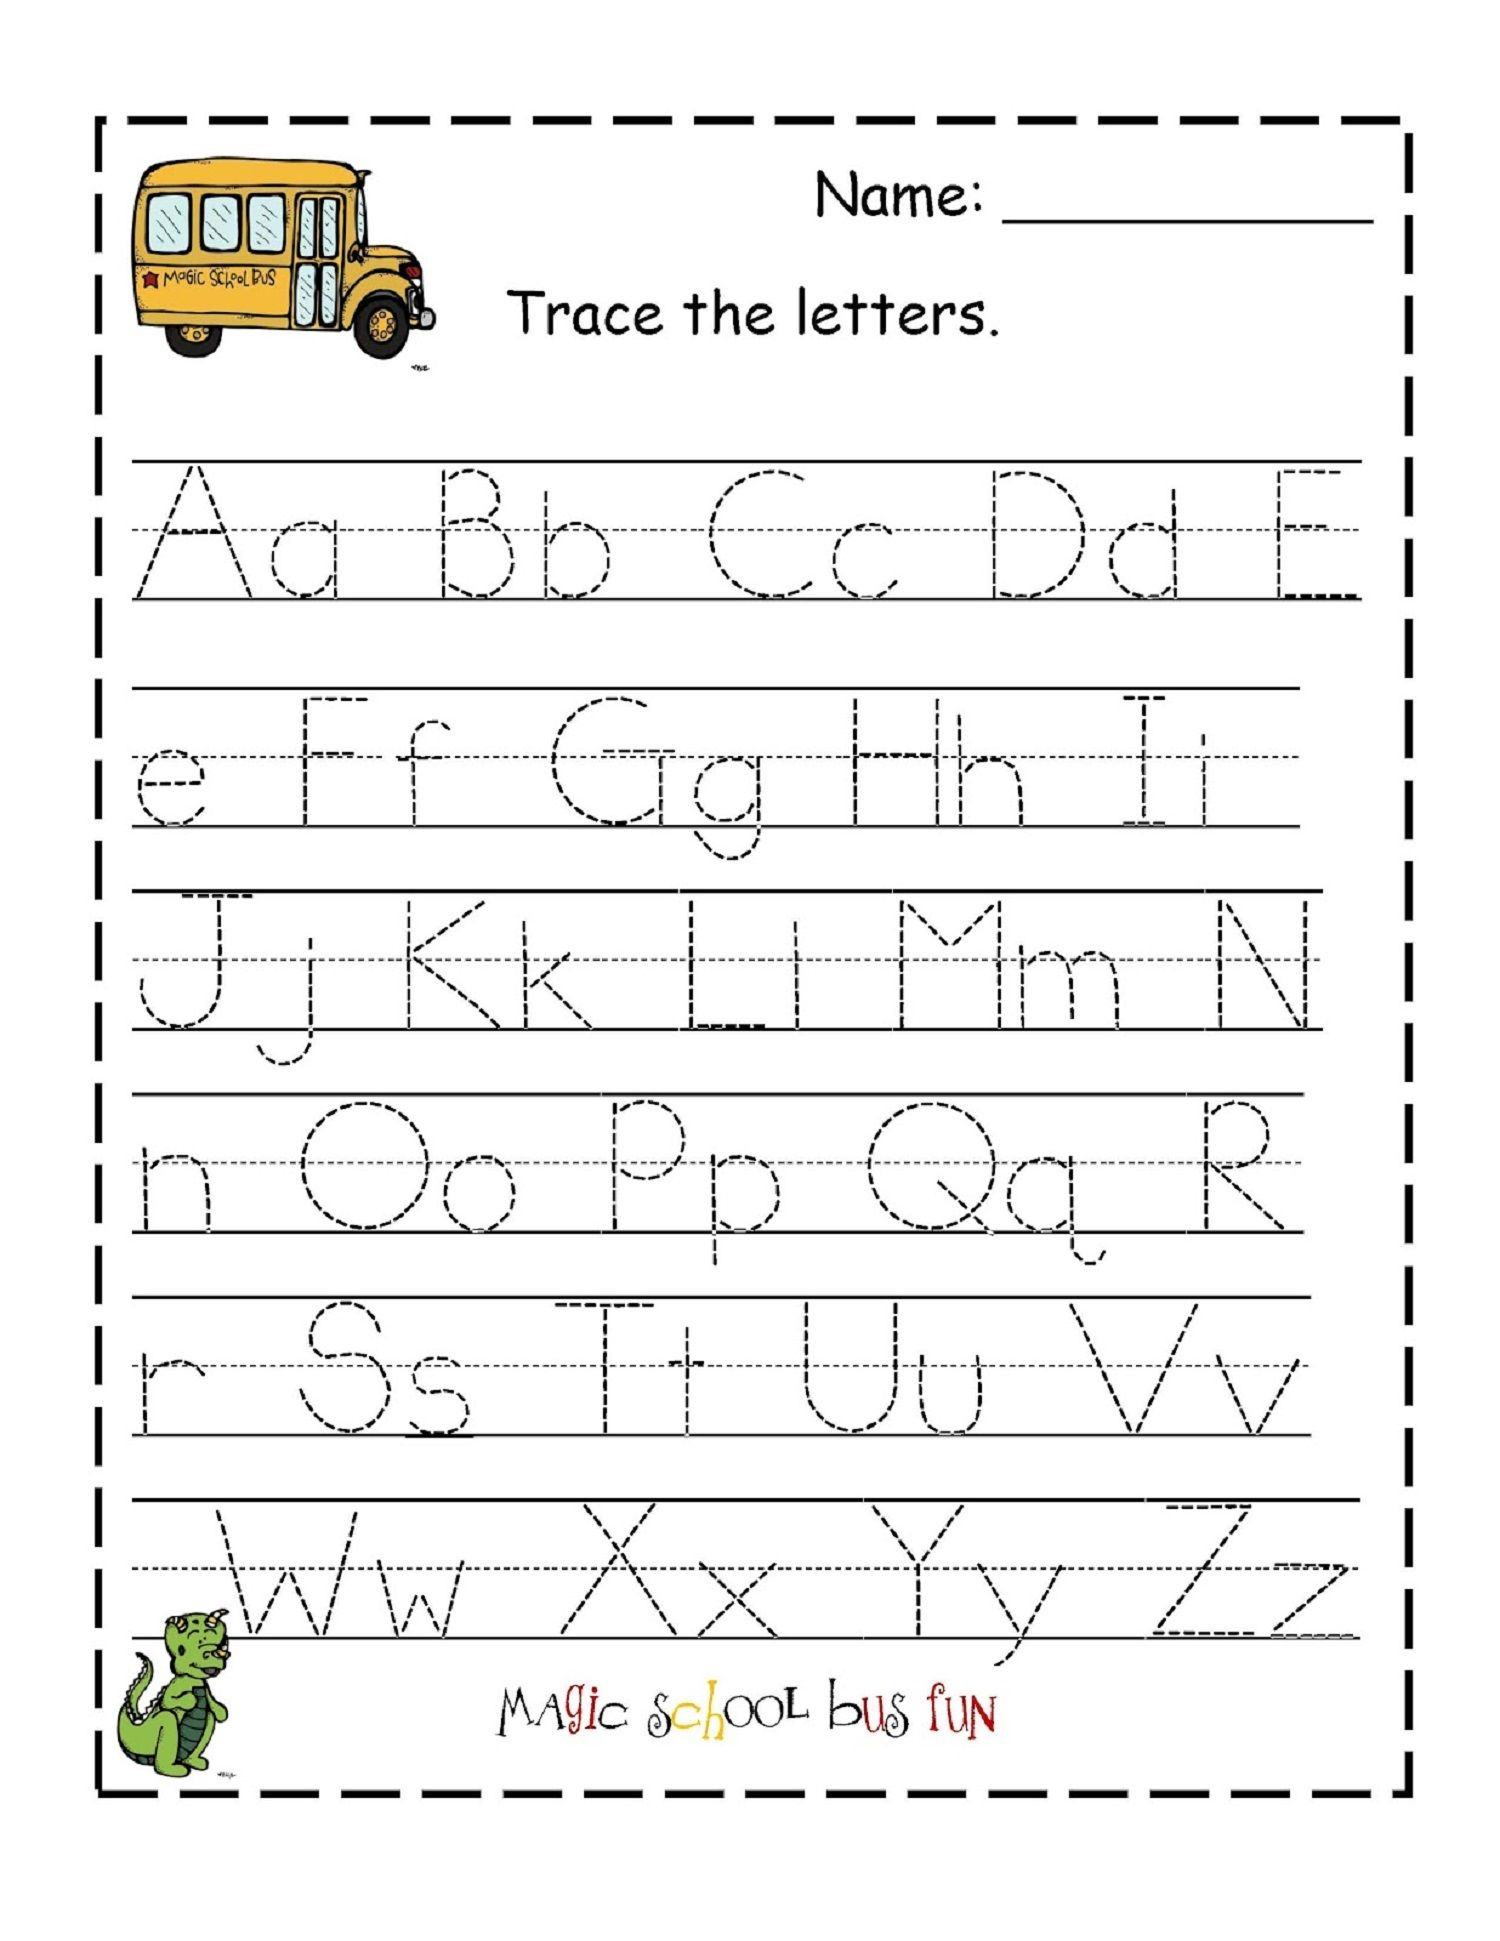 Traceable Alphabet For Learning Exercise | Letter Tracing in Practice Tracing Alphabet Letters